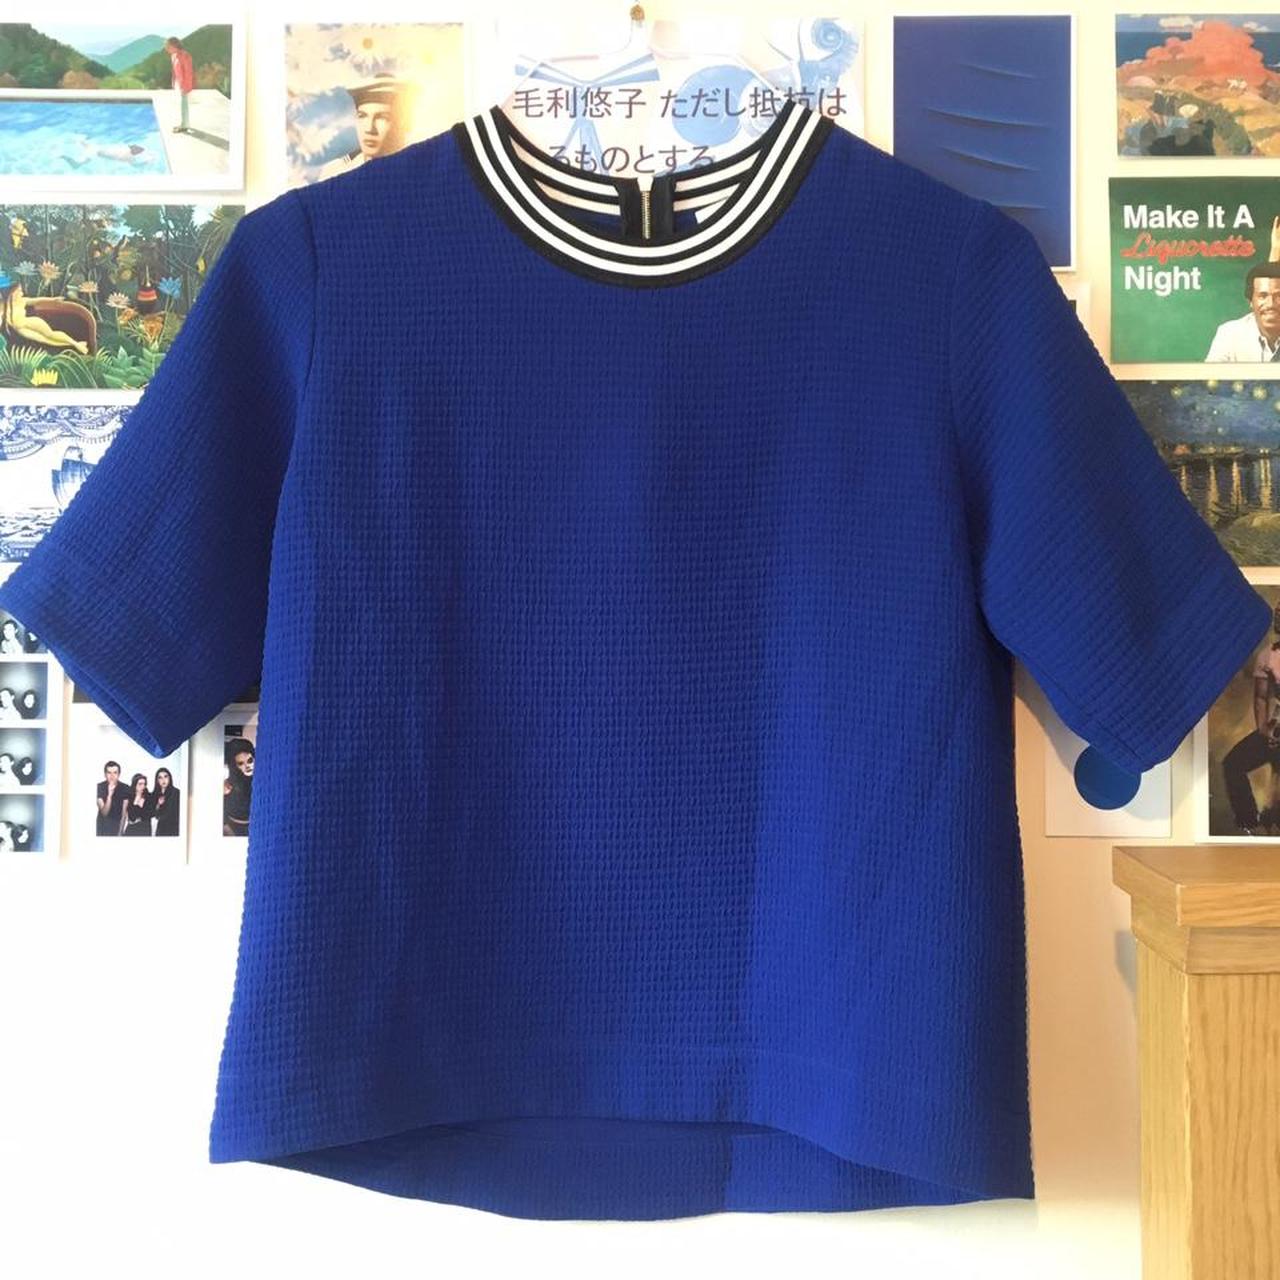 Product Image 4 - Cobalt blue textured Sandro top
A